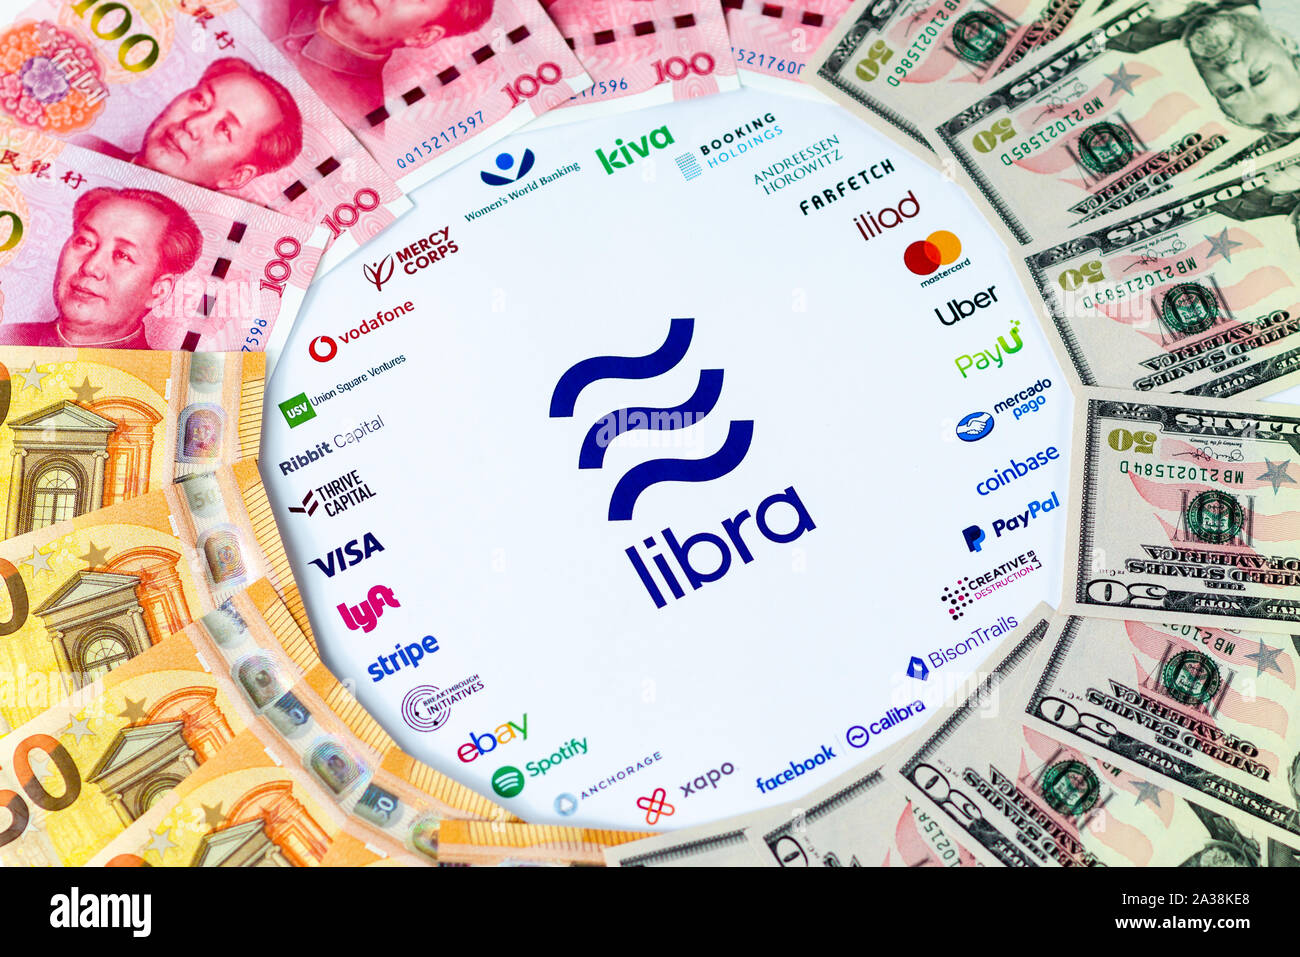 Libra Association logo on paper brochure and USD, CNY, EUR banknotes. Illustrative for Facebook plan to create global currency called Libra. Stock Photo